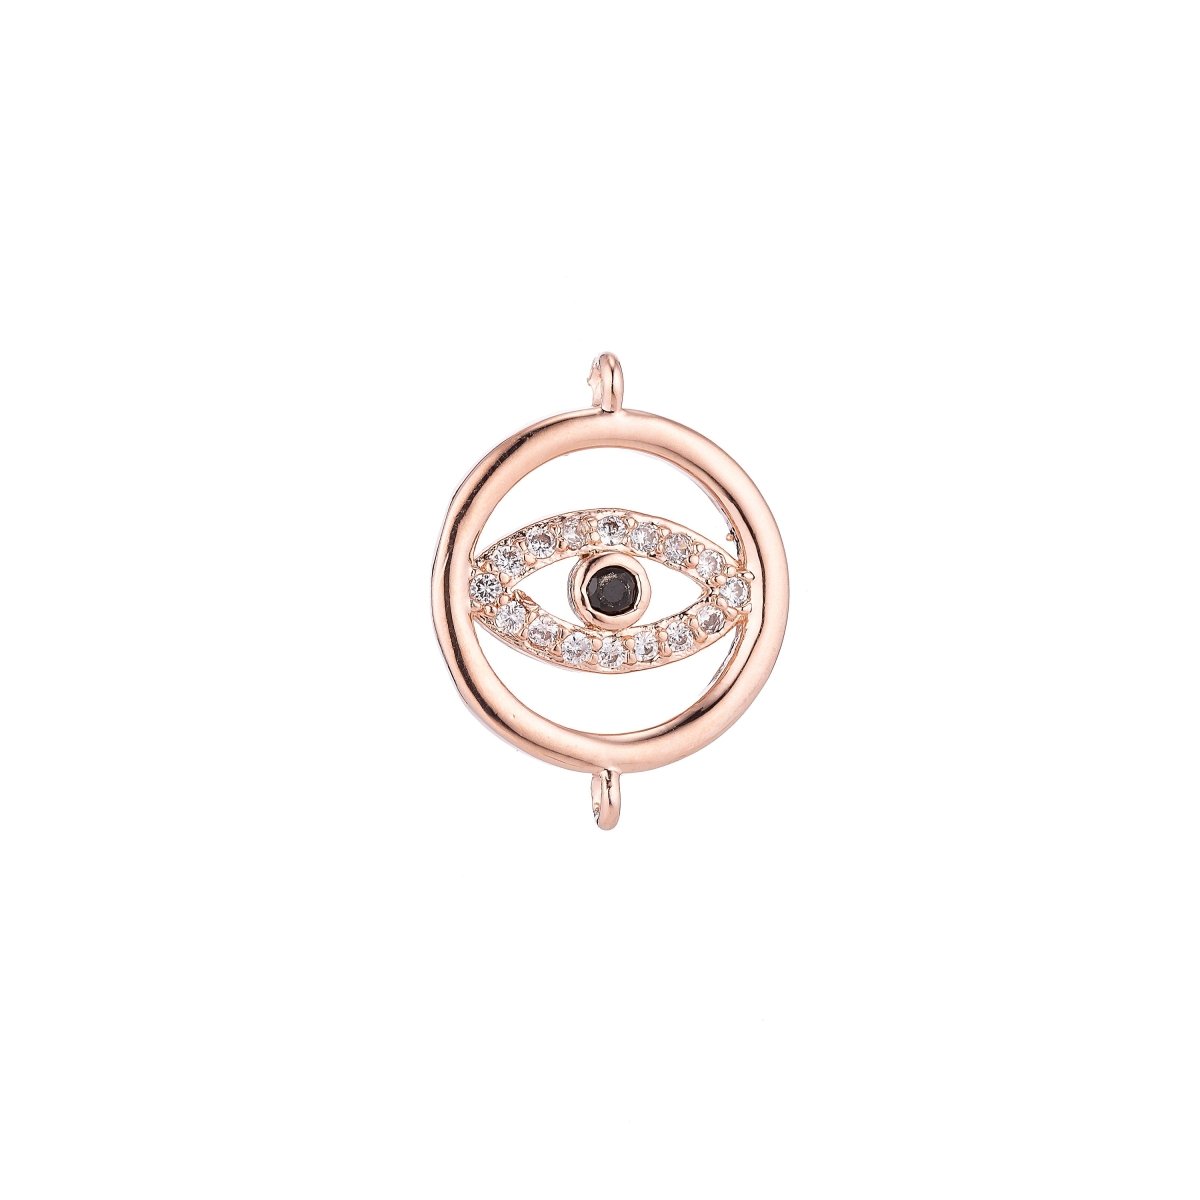 Gold Filled Spiritual Religious Evil Eye Cubic Zirconia Bracelet Charm Necklace Pendant Findings for Jewelry Making Greek Eye Connector F-038 - DLUXCA